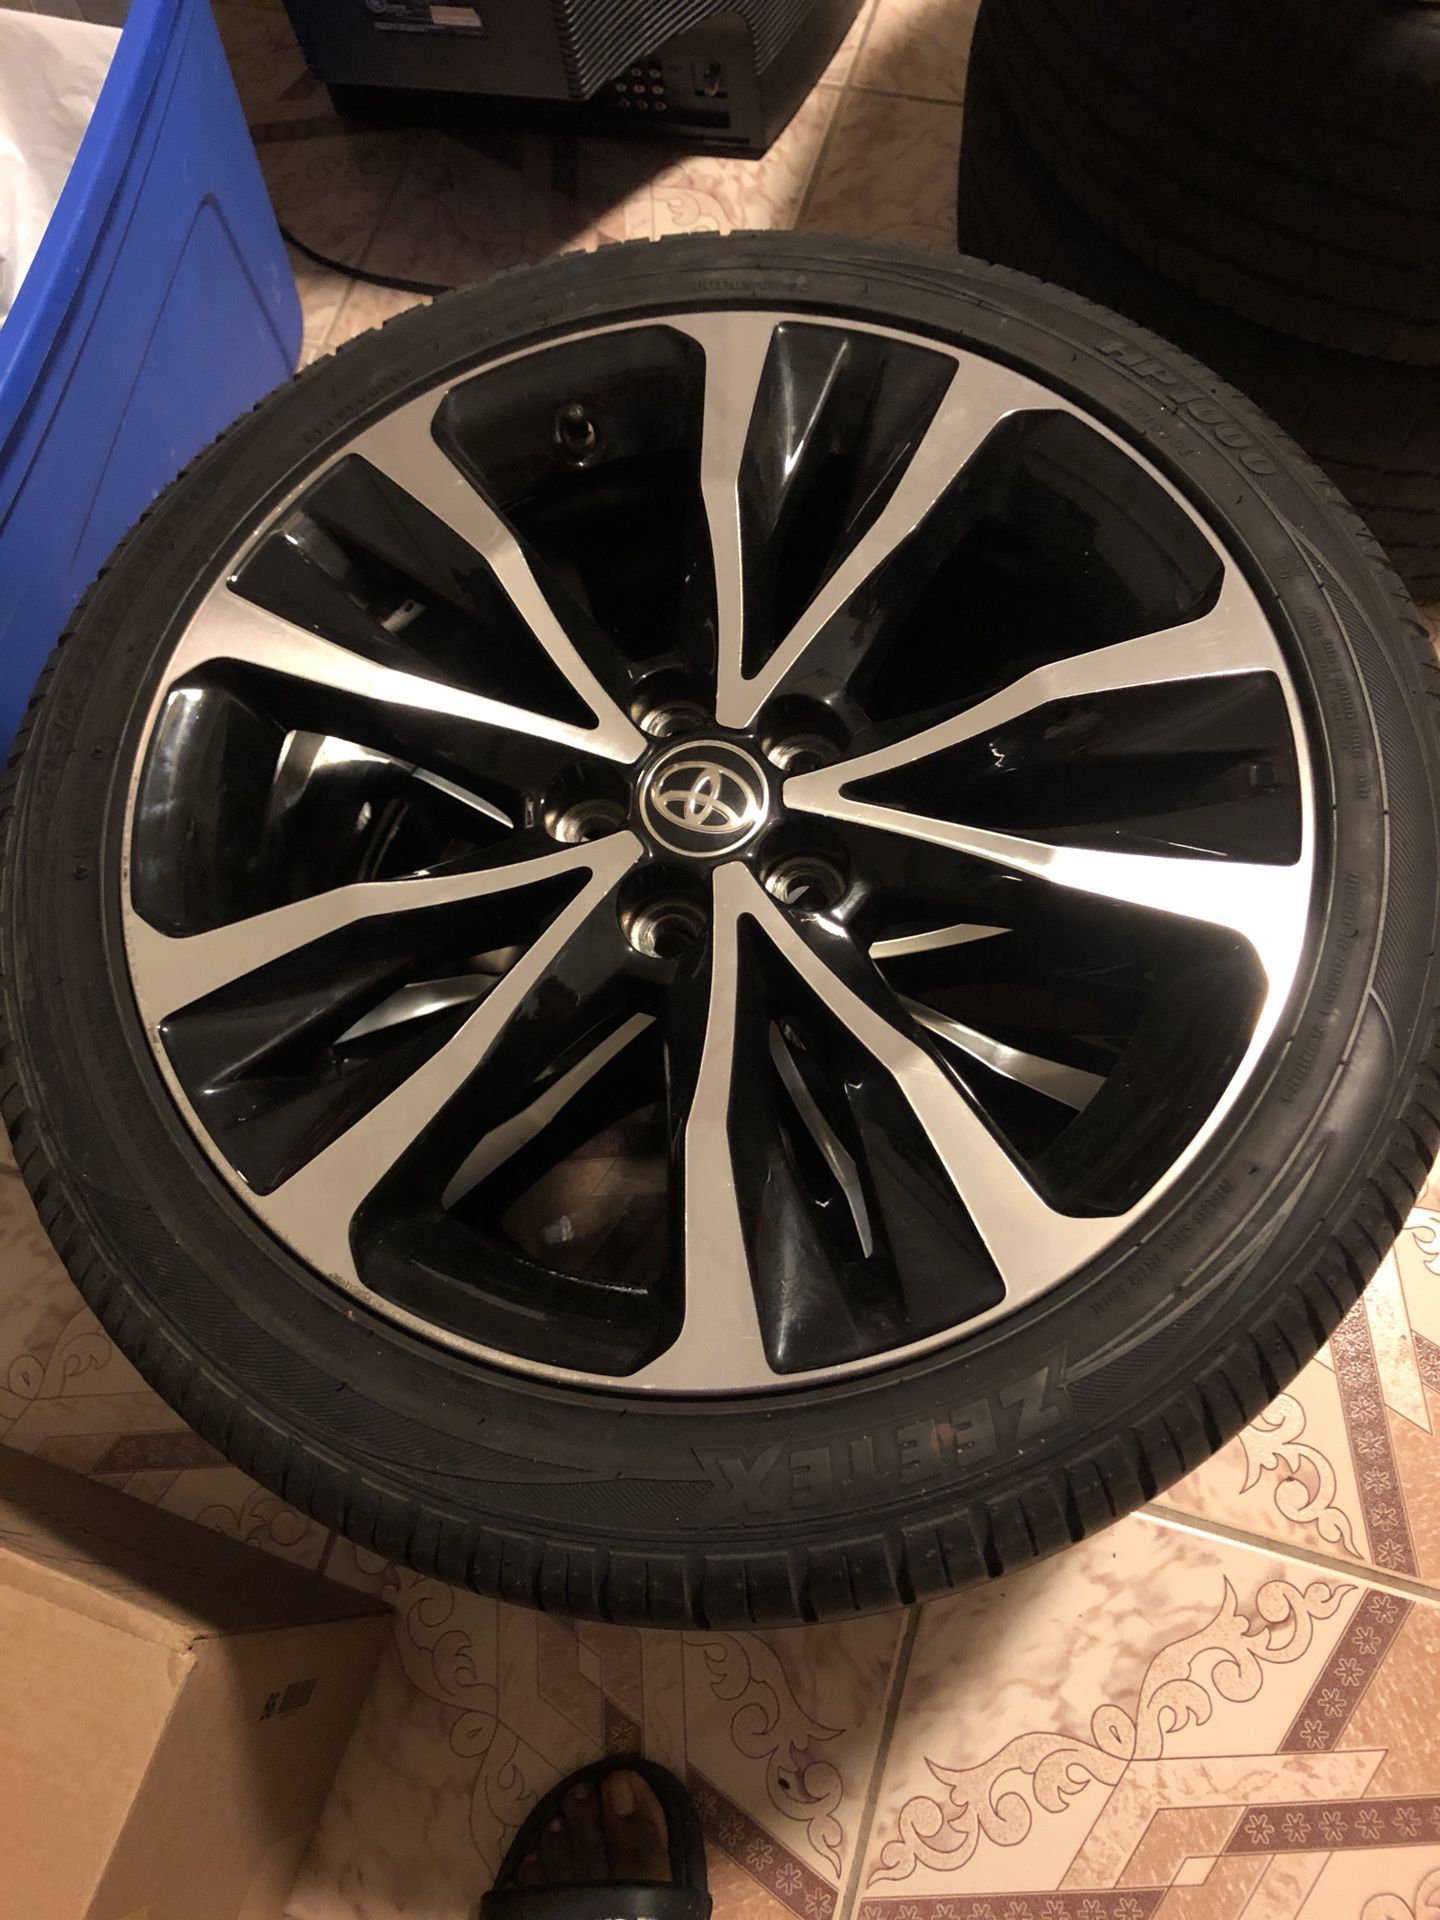 Toyota Corolla SE wheels/rims and tires 215/45R17